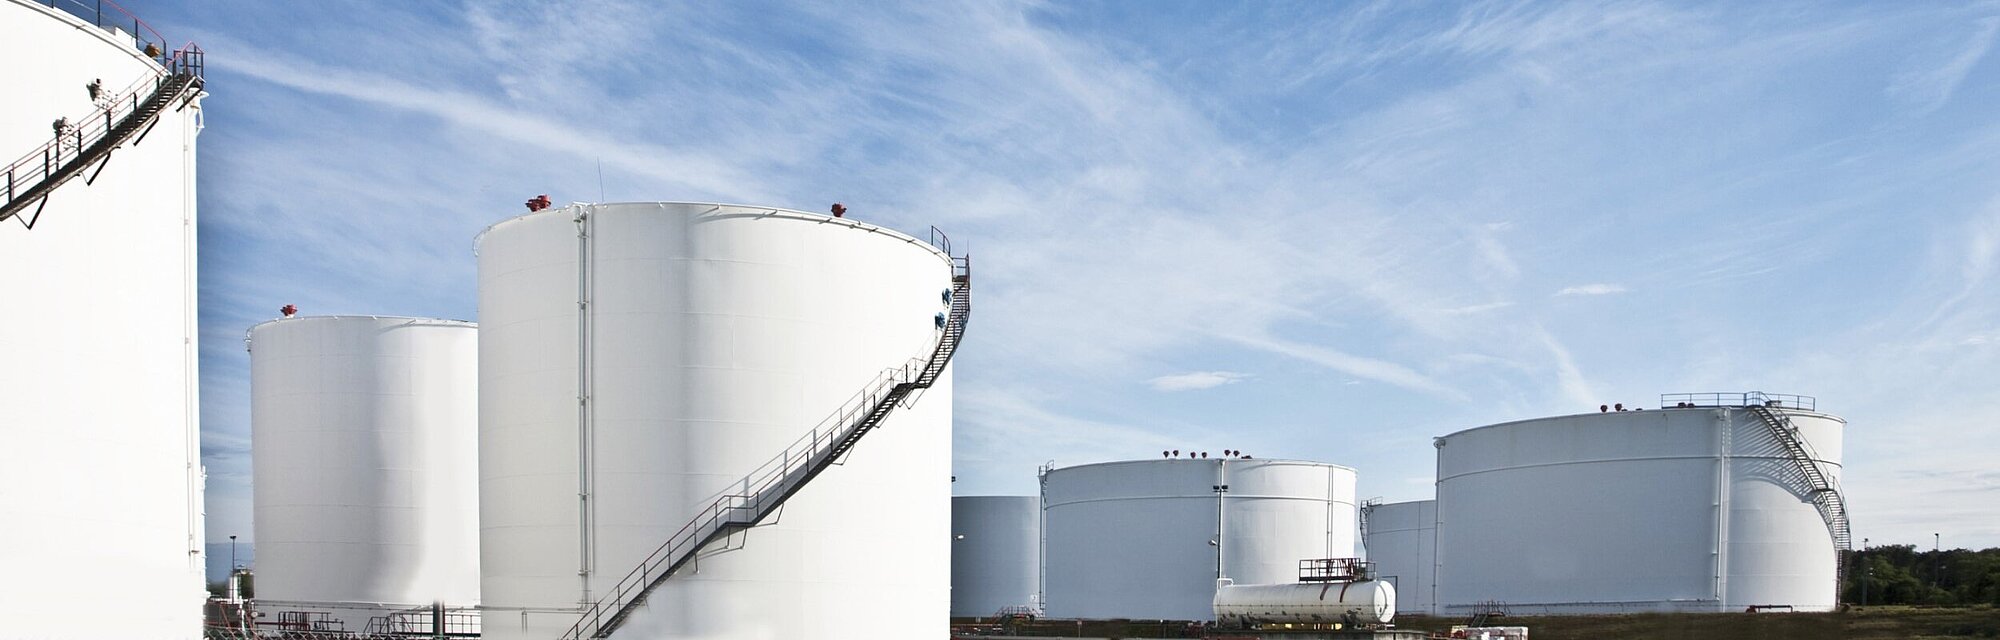 Protection of Storage Tanks in Tank Farms